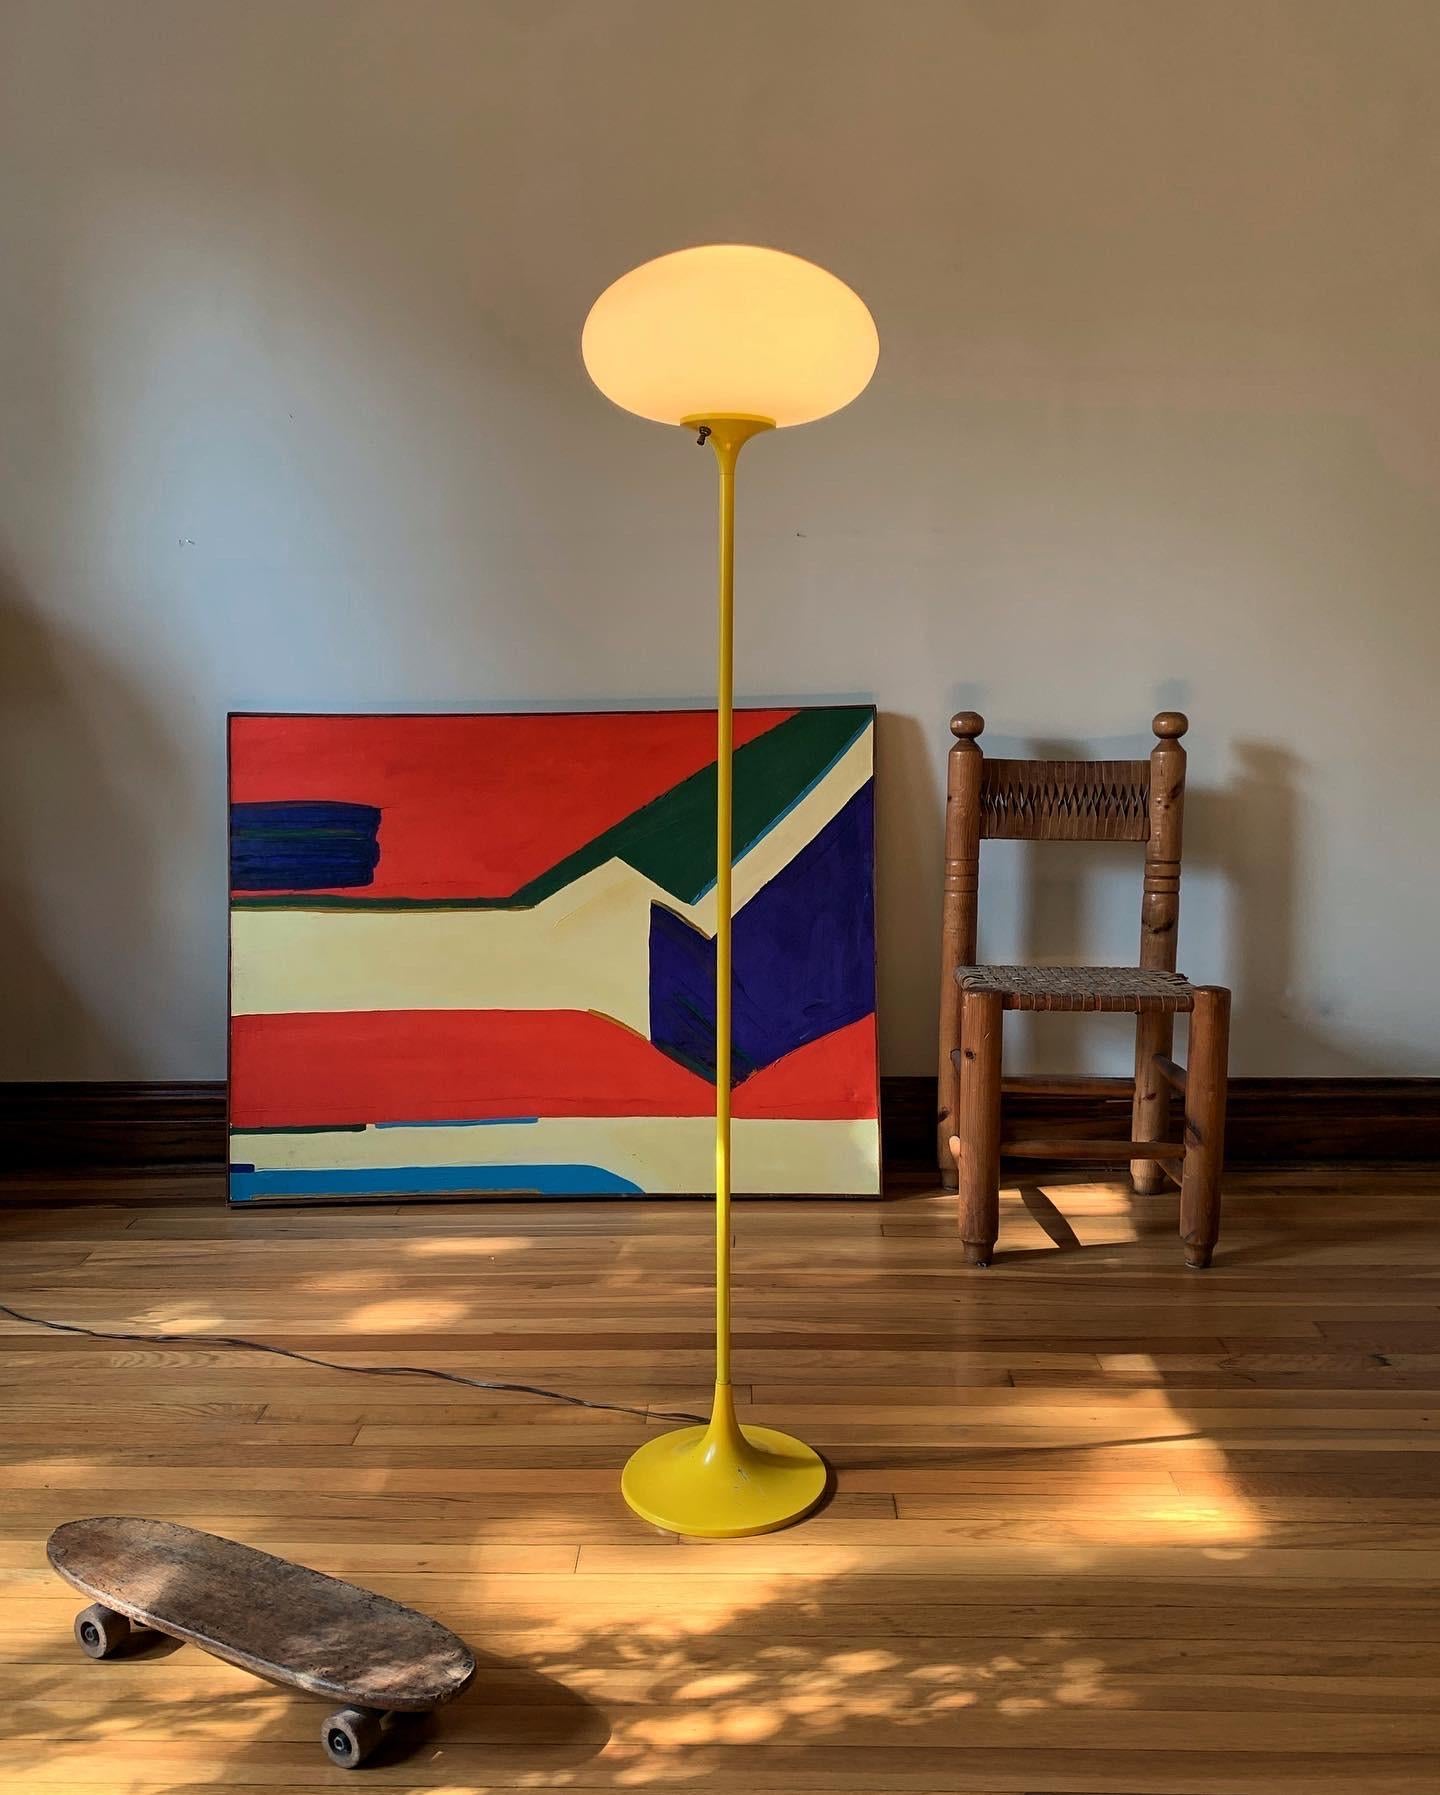 Equal parts elegantly modern and tastefully whimsical comes a rare offering from American lighting manufacturer Laurel Lamp Co, attributed to designer Bill Curry. Featuring their iconic glass shade, and the equally recognizable mushroom shaped base